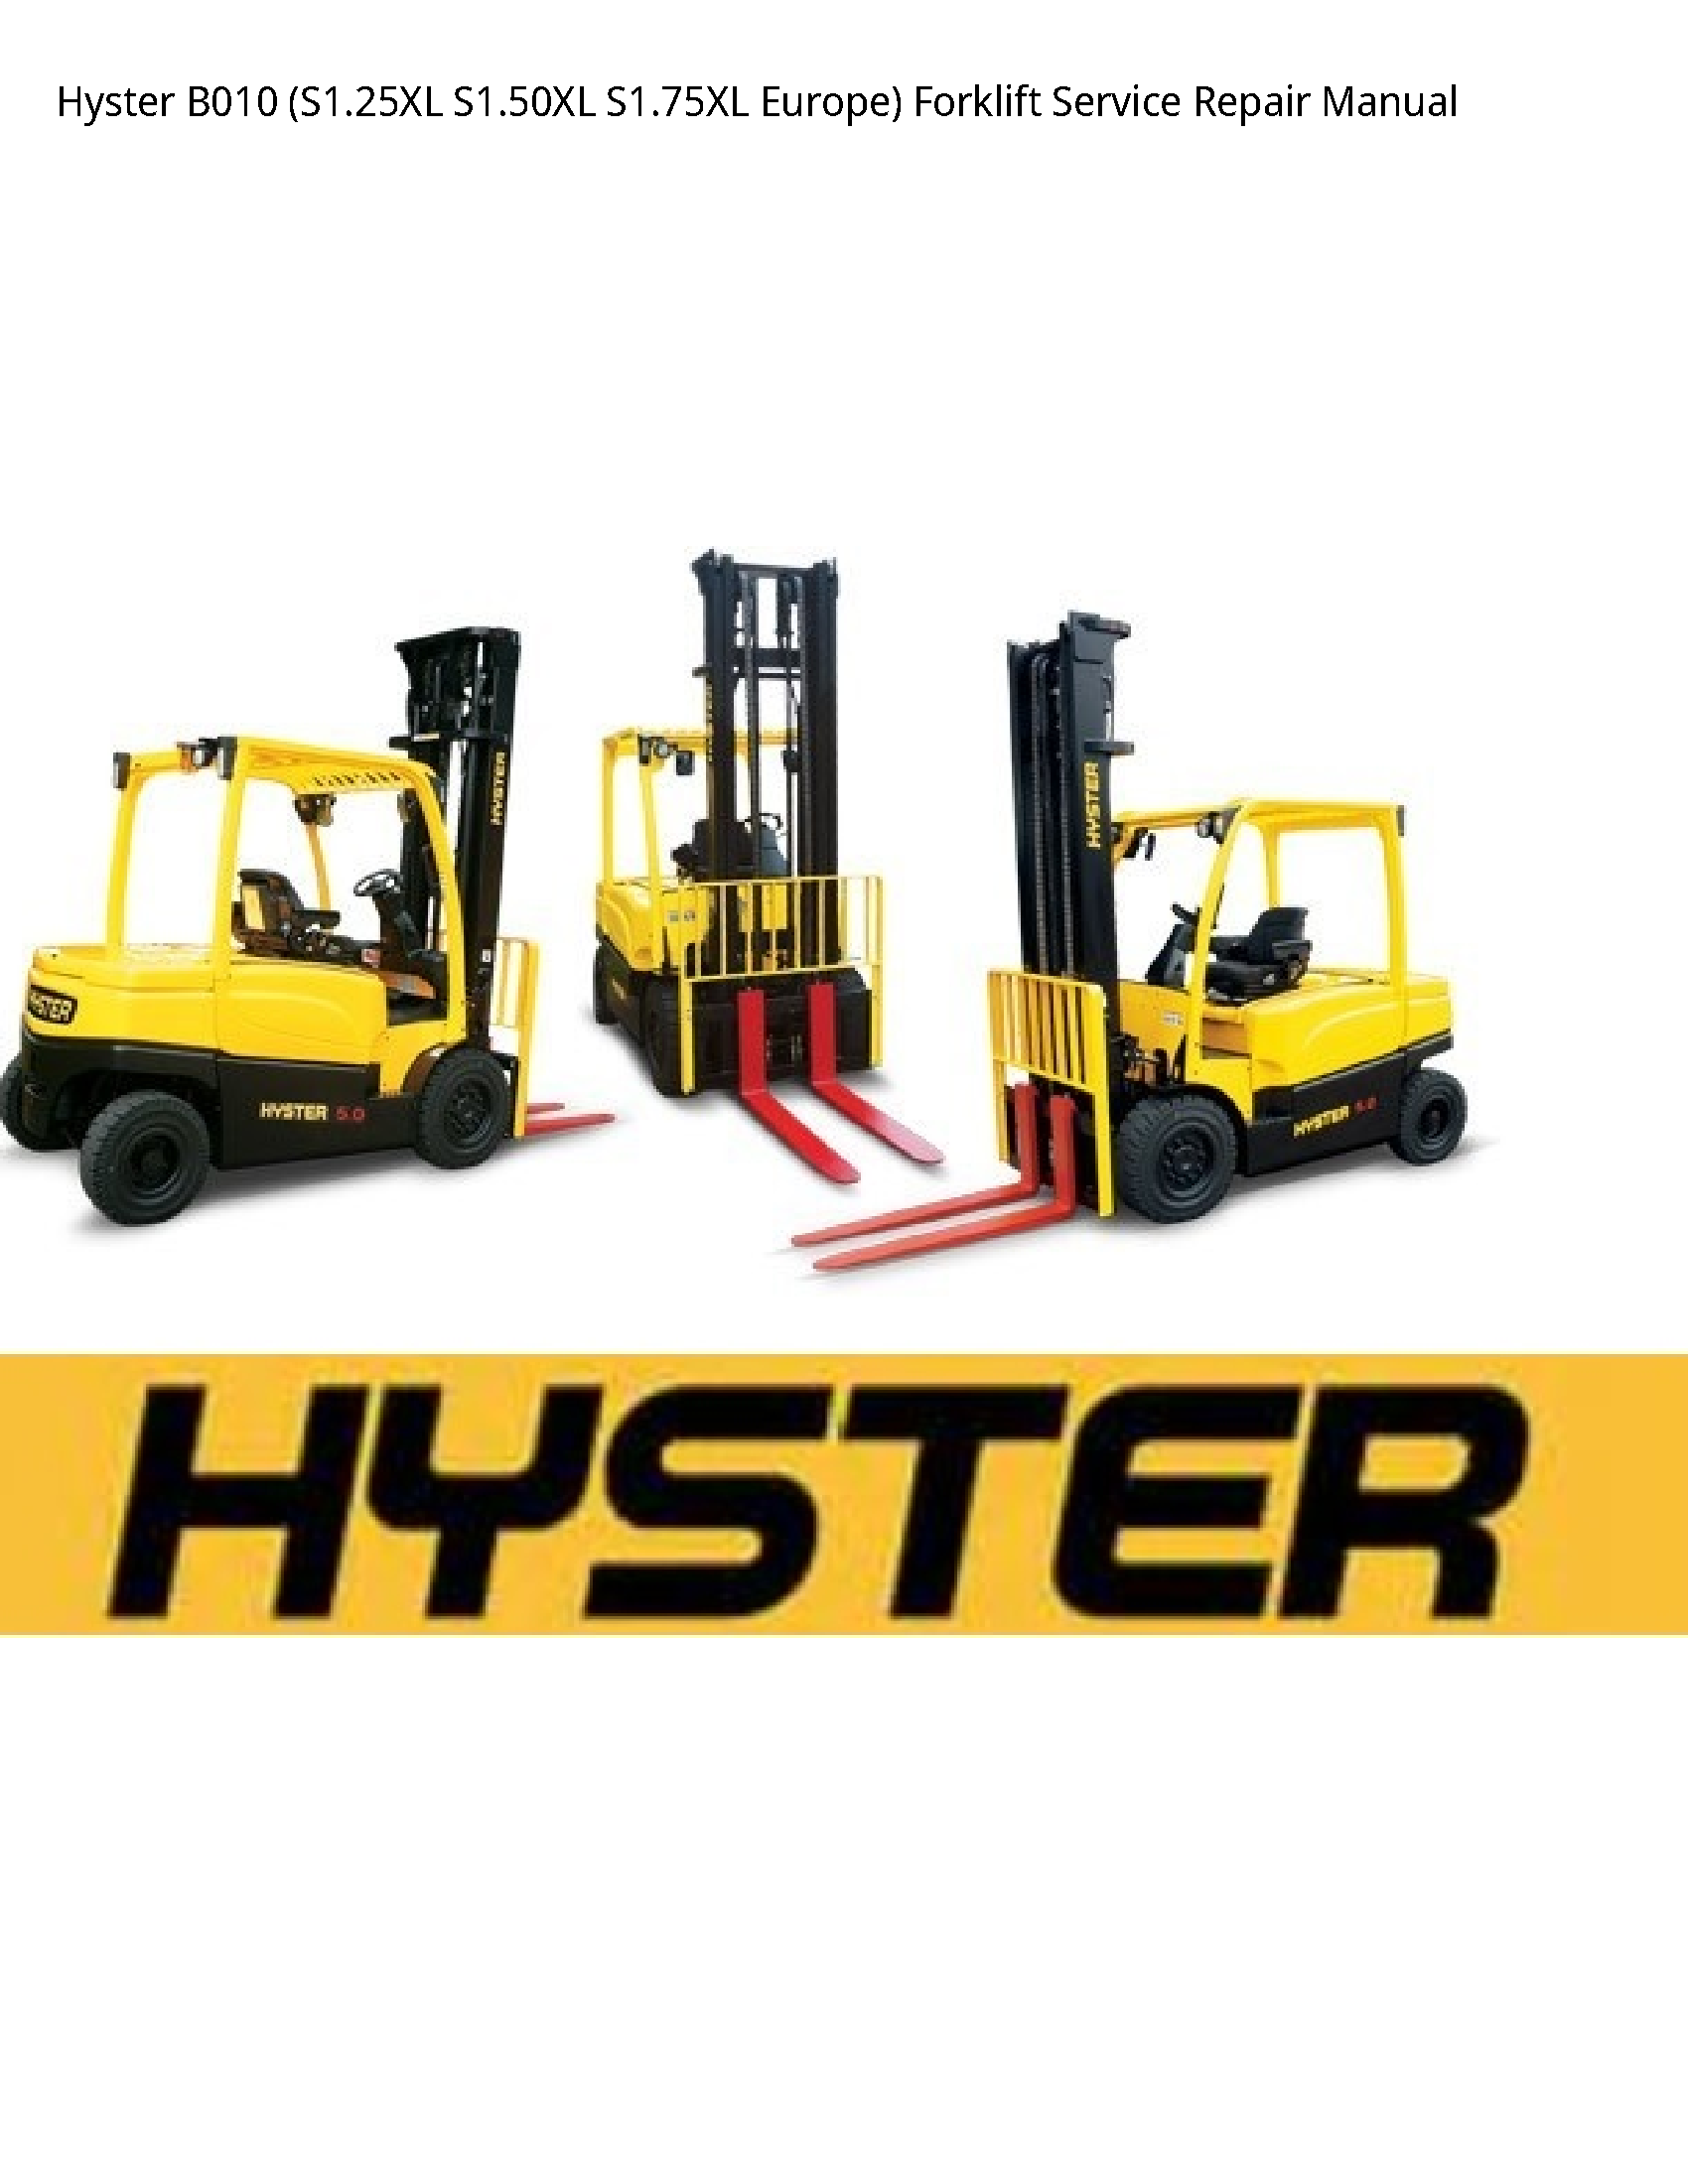 Hyster B010 Europe) Forklift manual